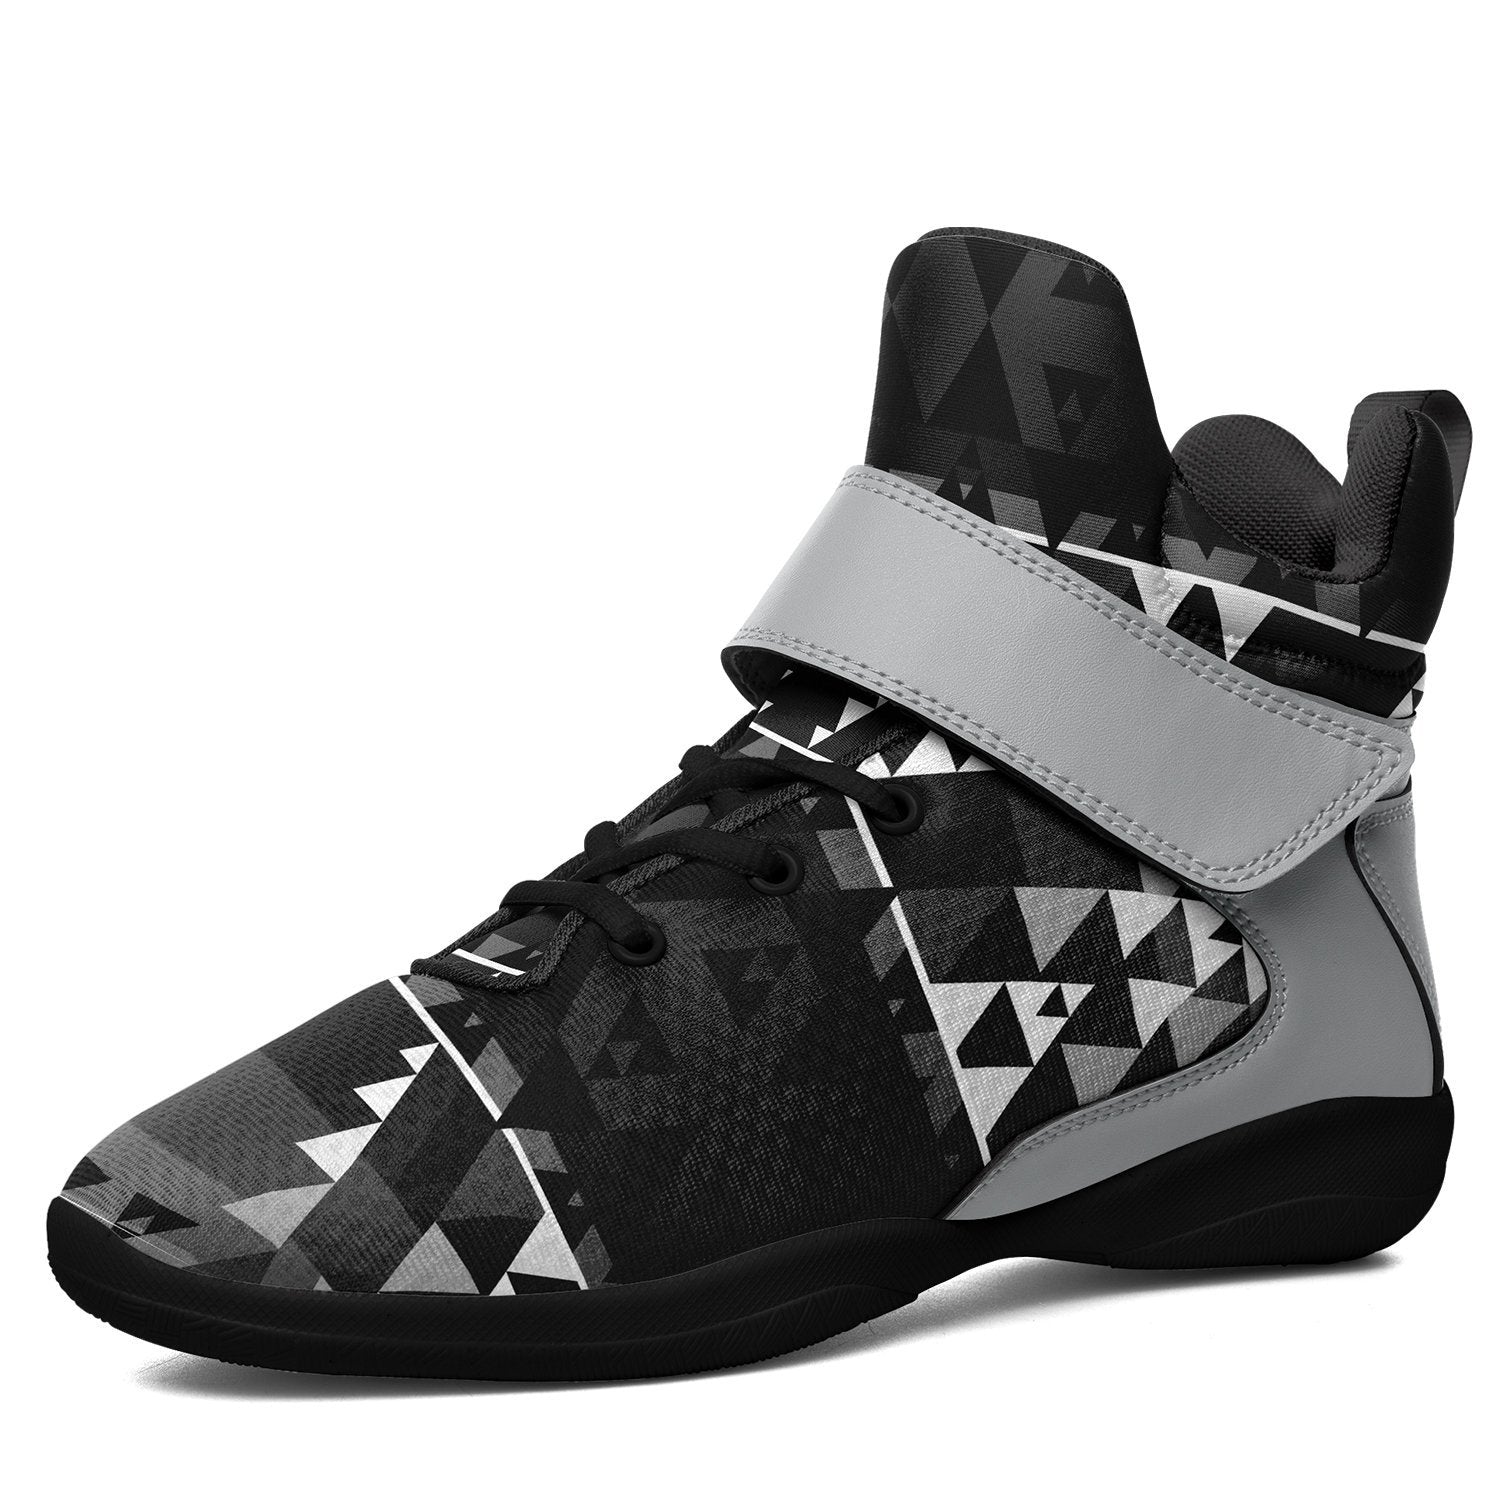 Writing on Stone Black and White Kid's Ipottaa Basketball / Sport High Top Shoes 49 Dzine US Child 12.5 / EUR 30 Black Sole with Gray Strap 